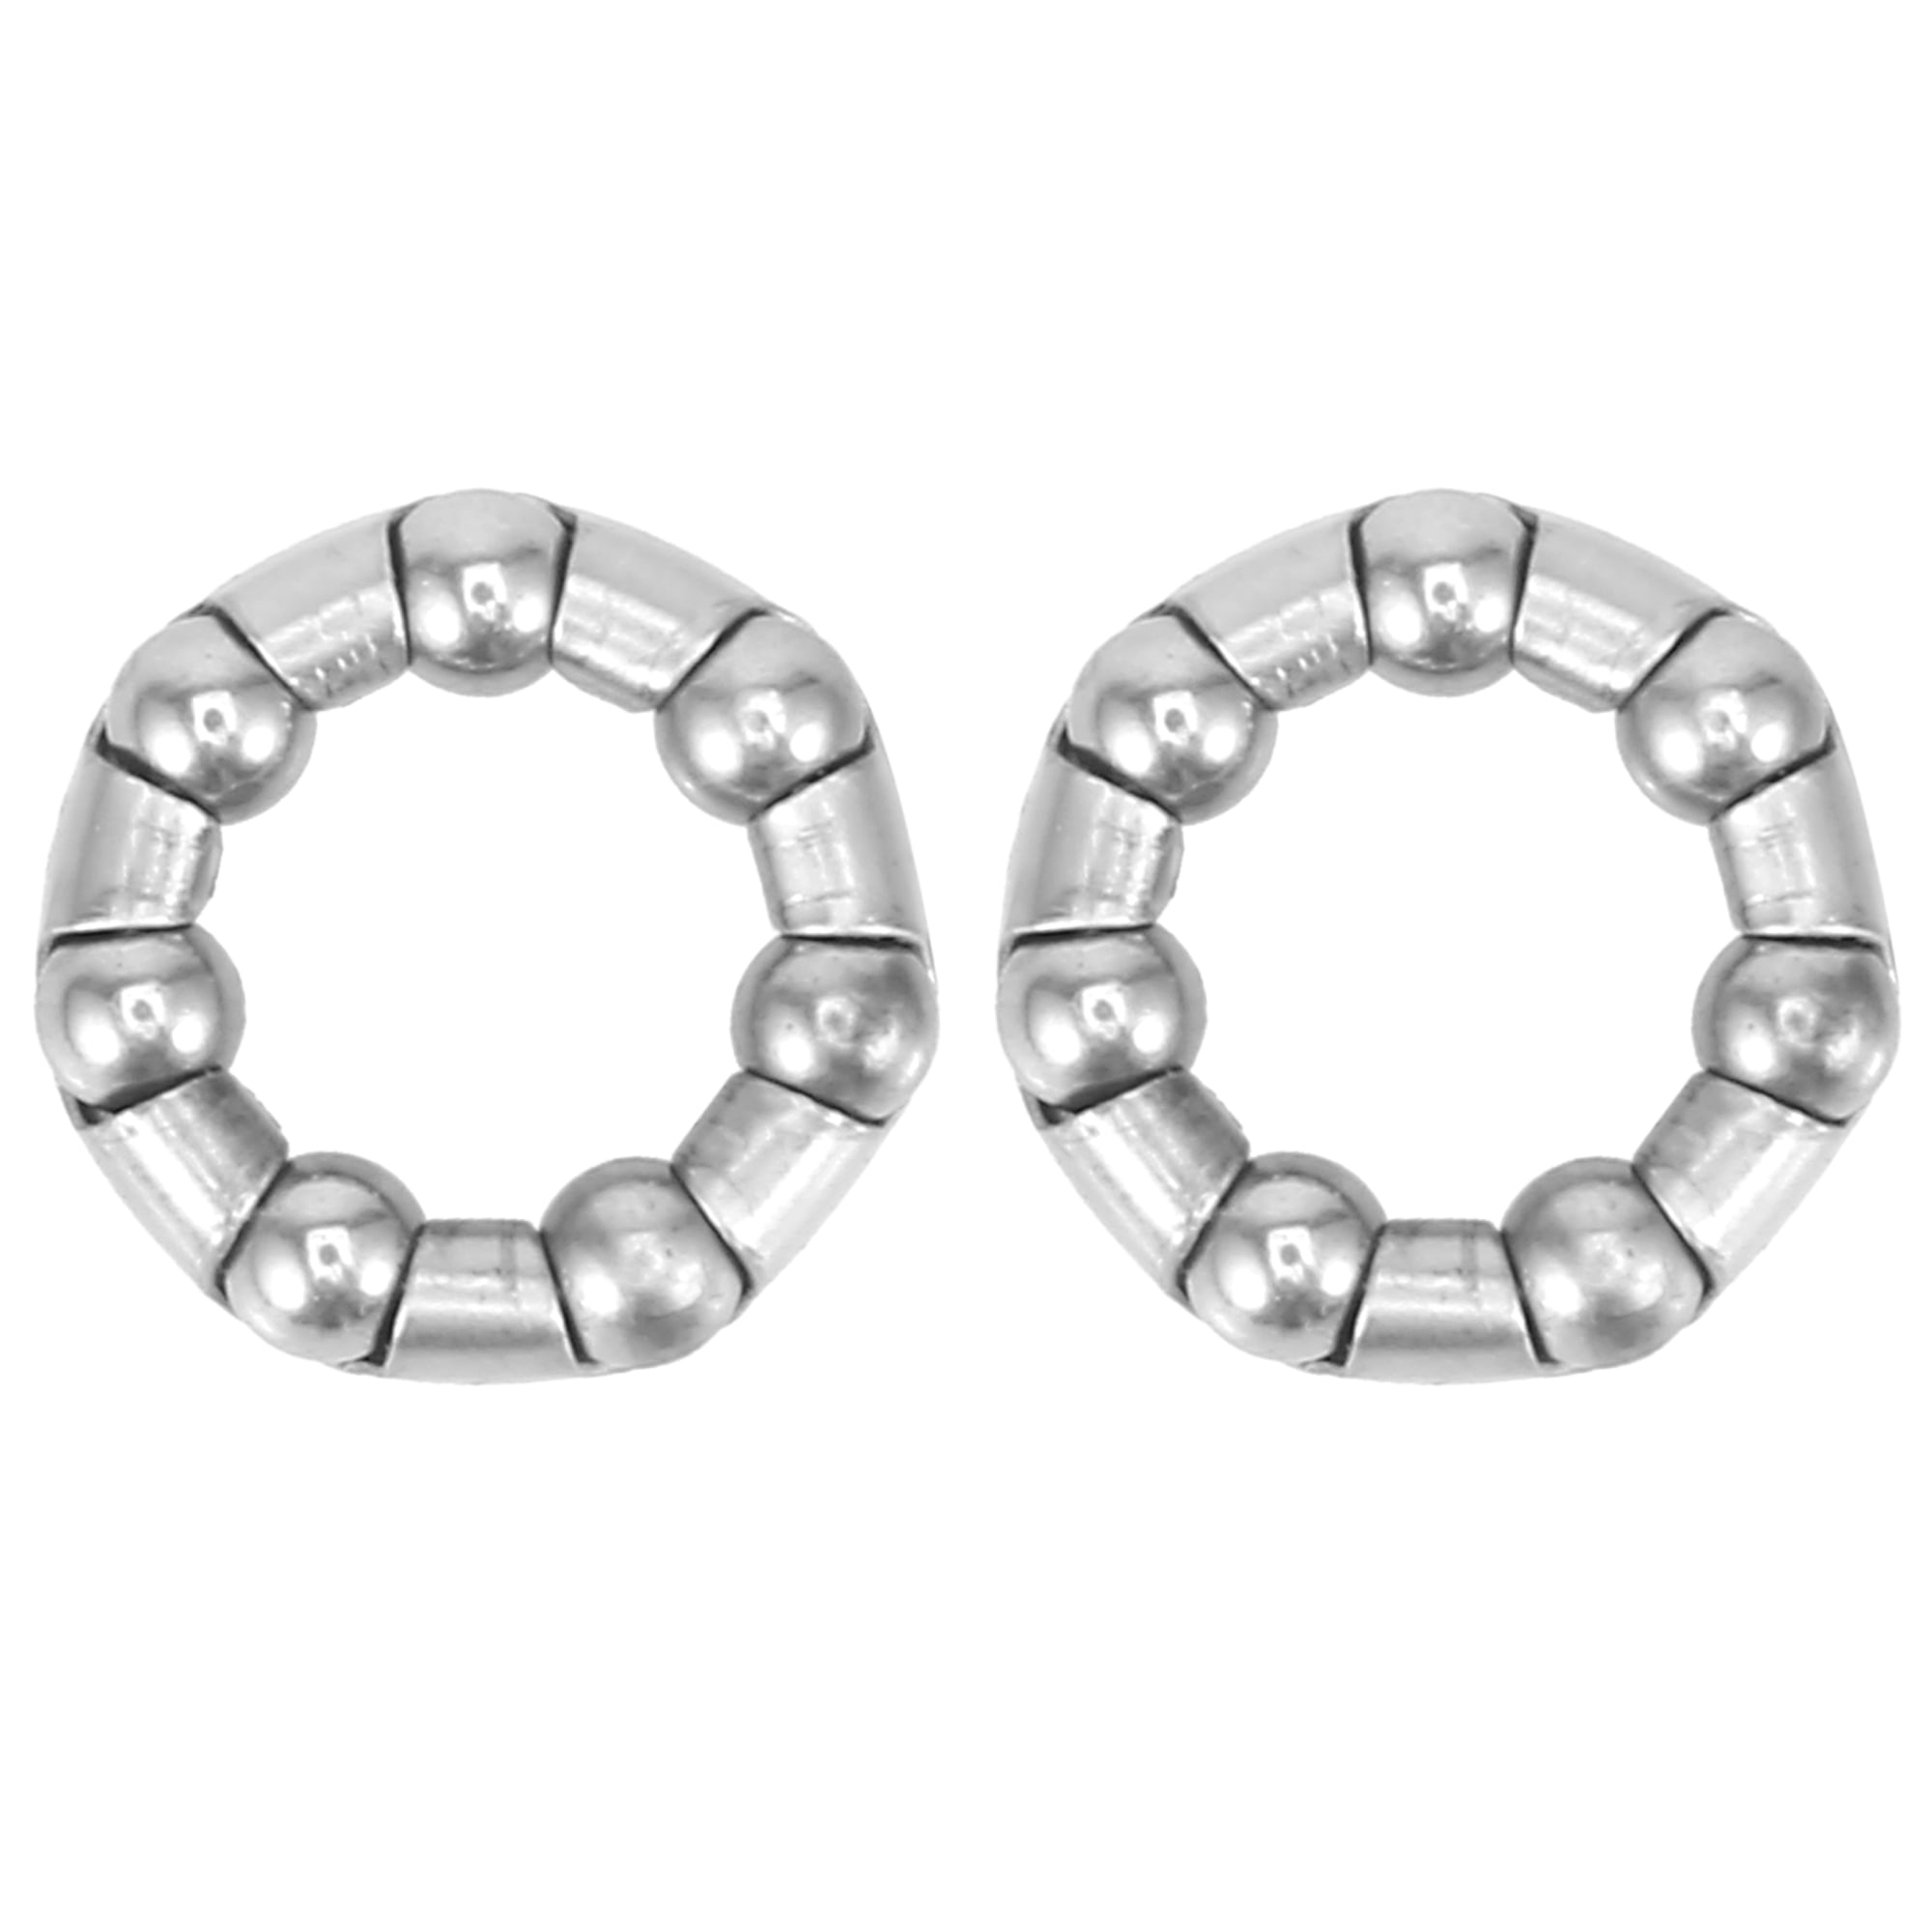 Precision Balls 7/64" Solid Chrome Steel G10 for Bearing Keychain Wheel 100pcs 